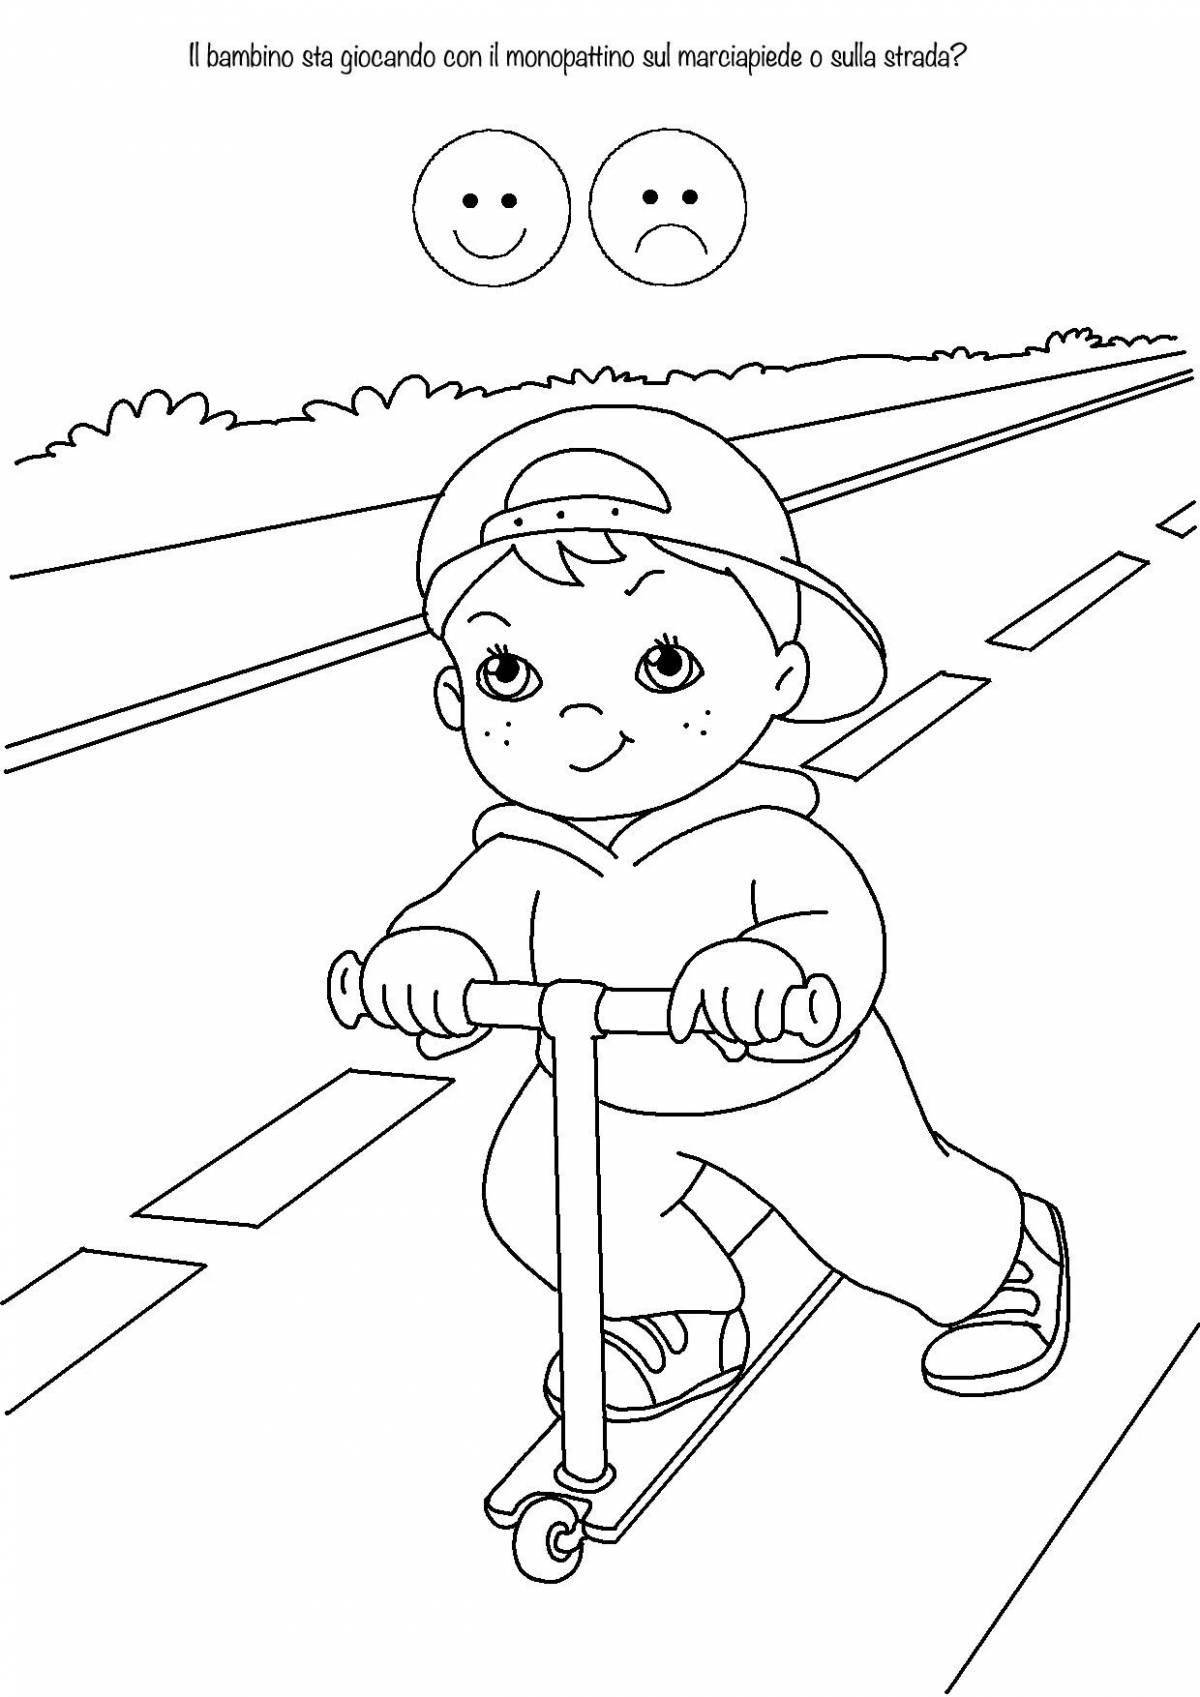 Colorful twinkling coloring pages for kids